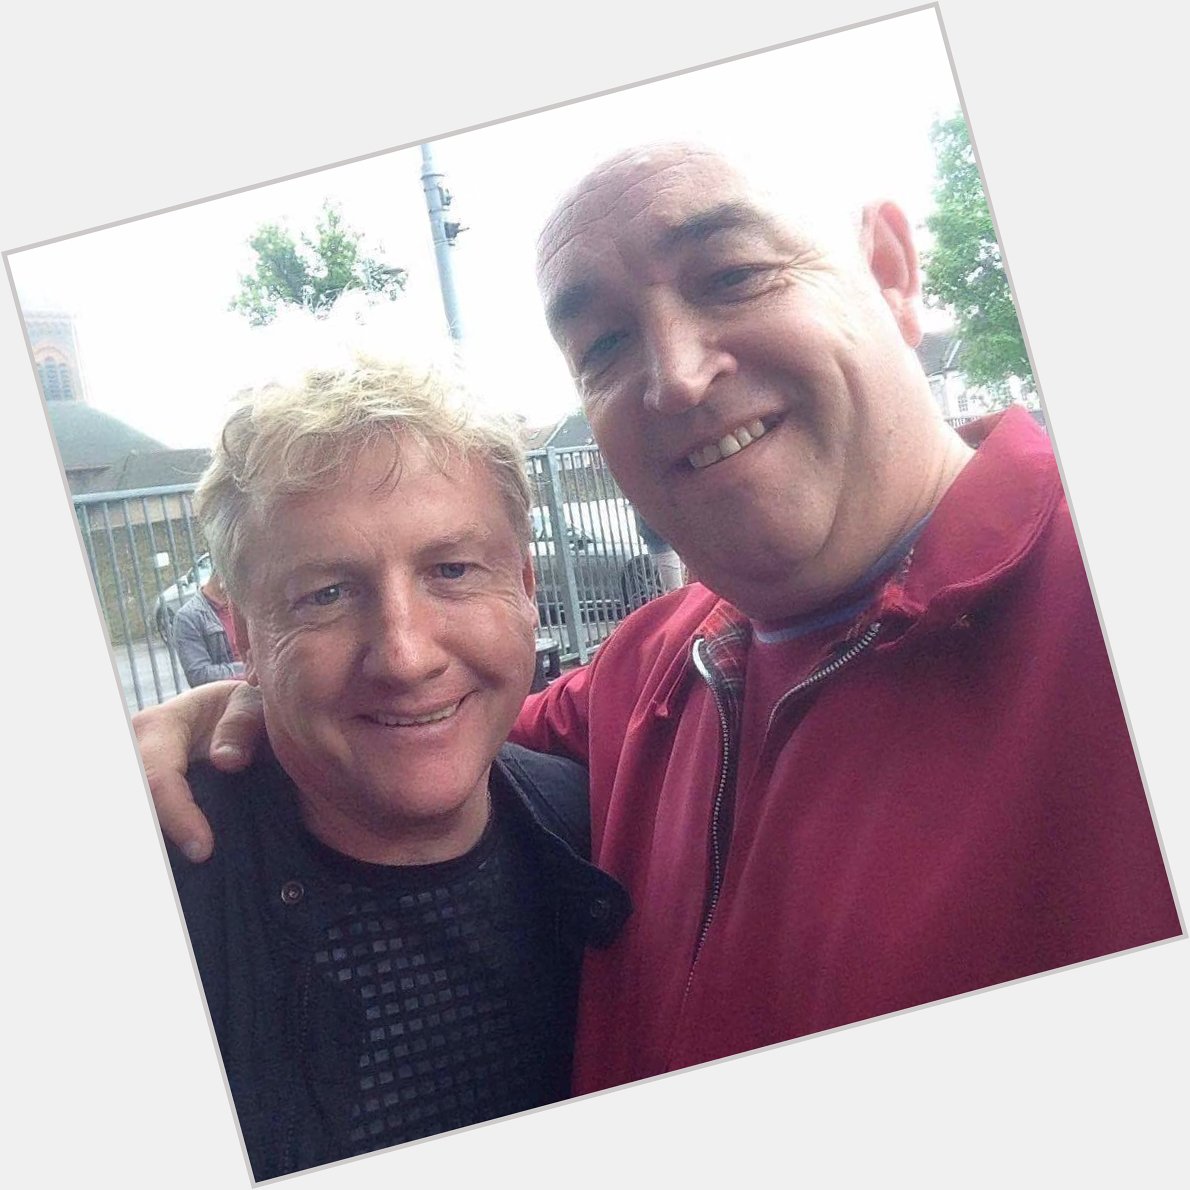  happy birthday to the legend, frank McAvennie. Could do with you in the team now mate   